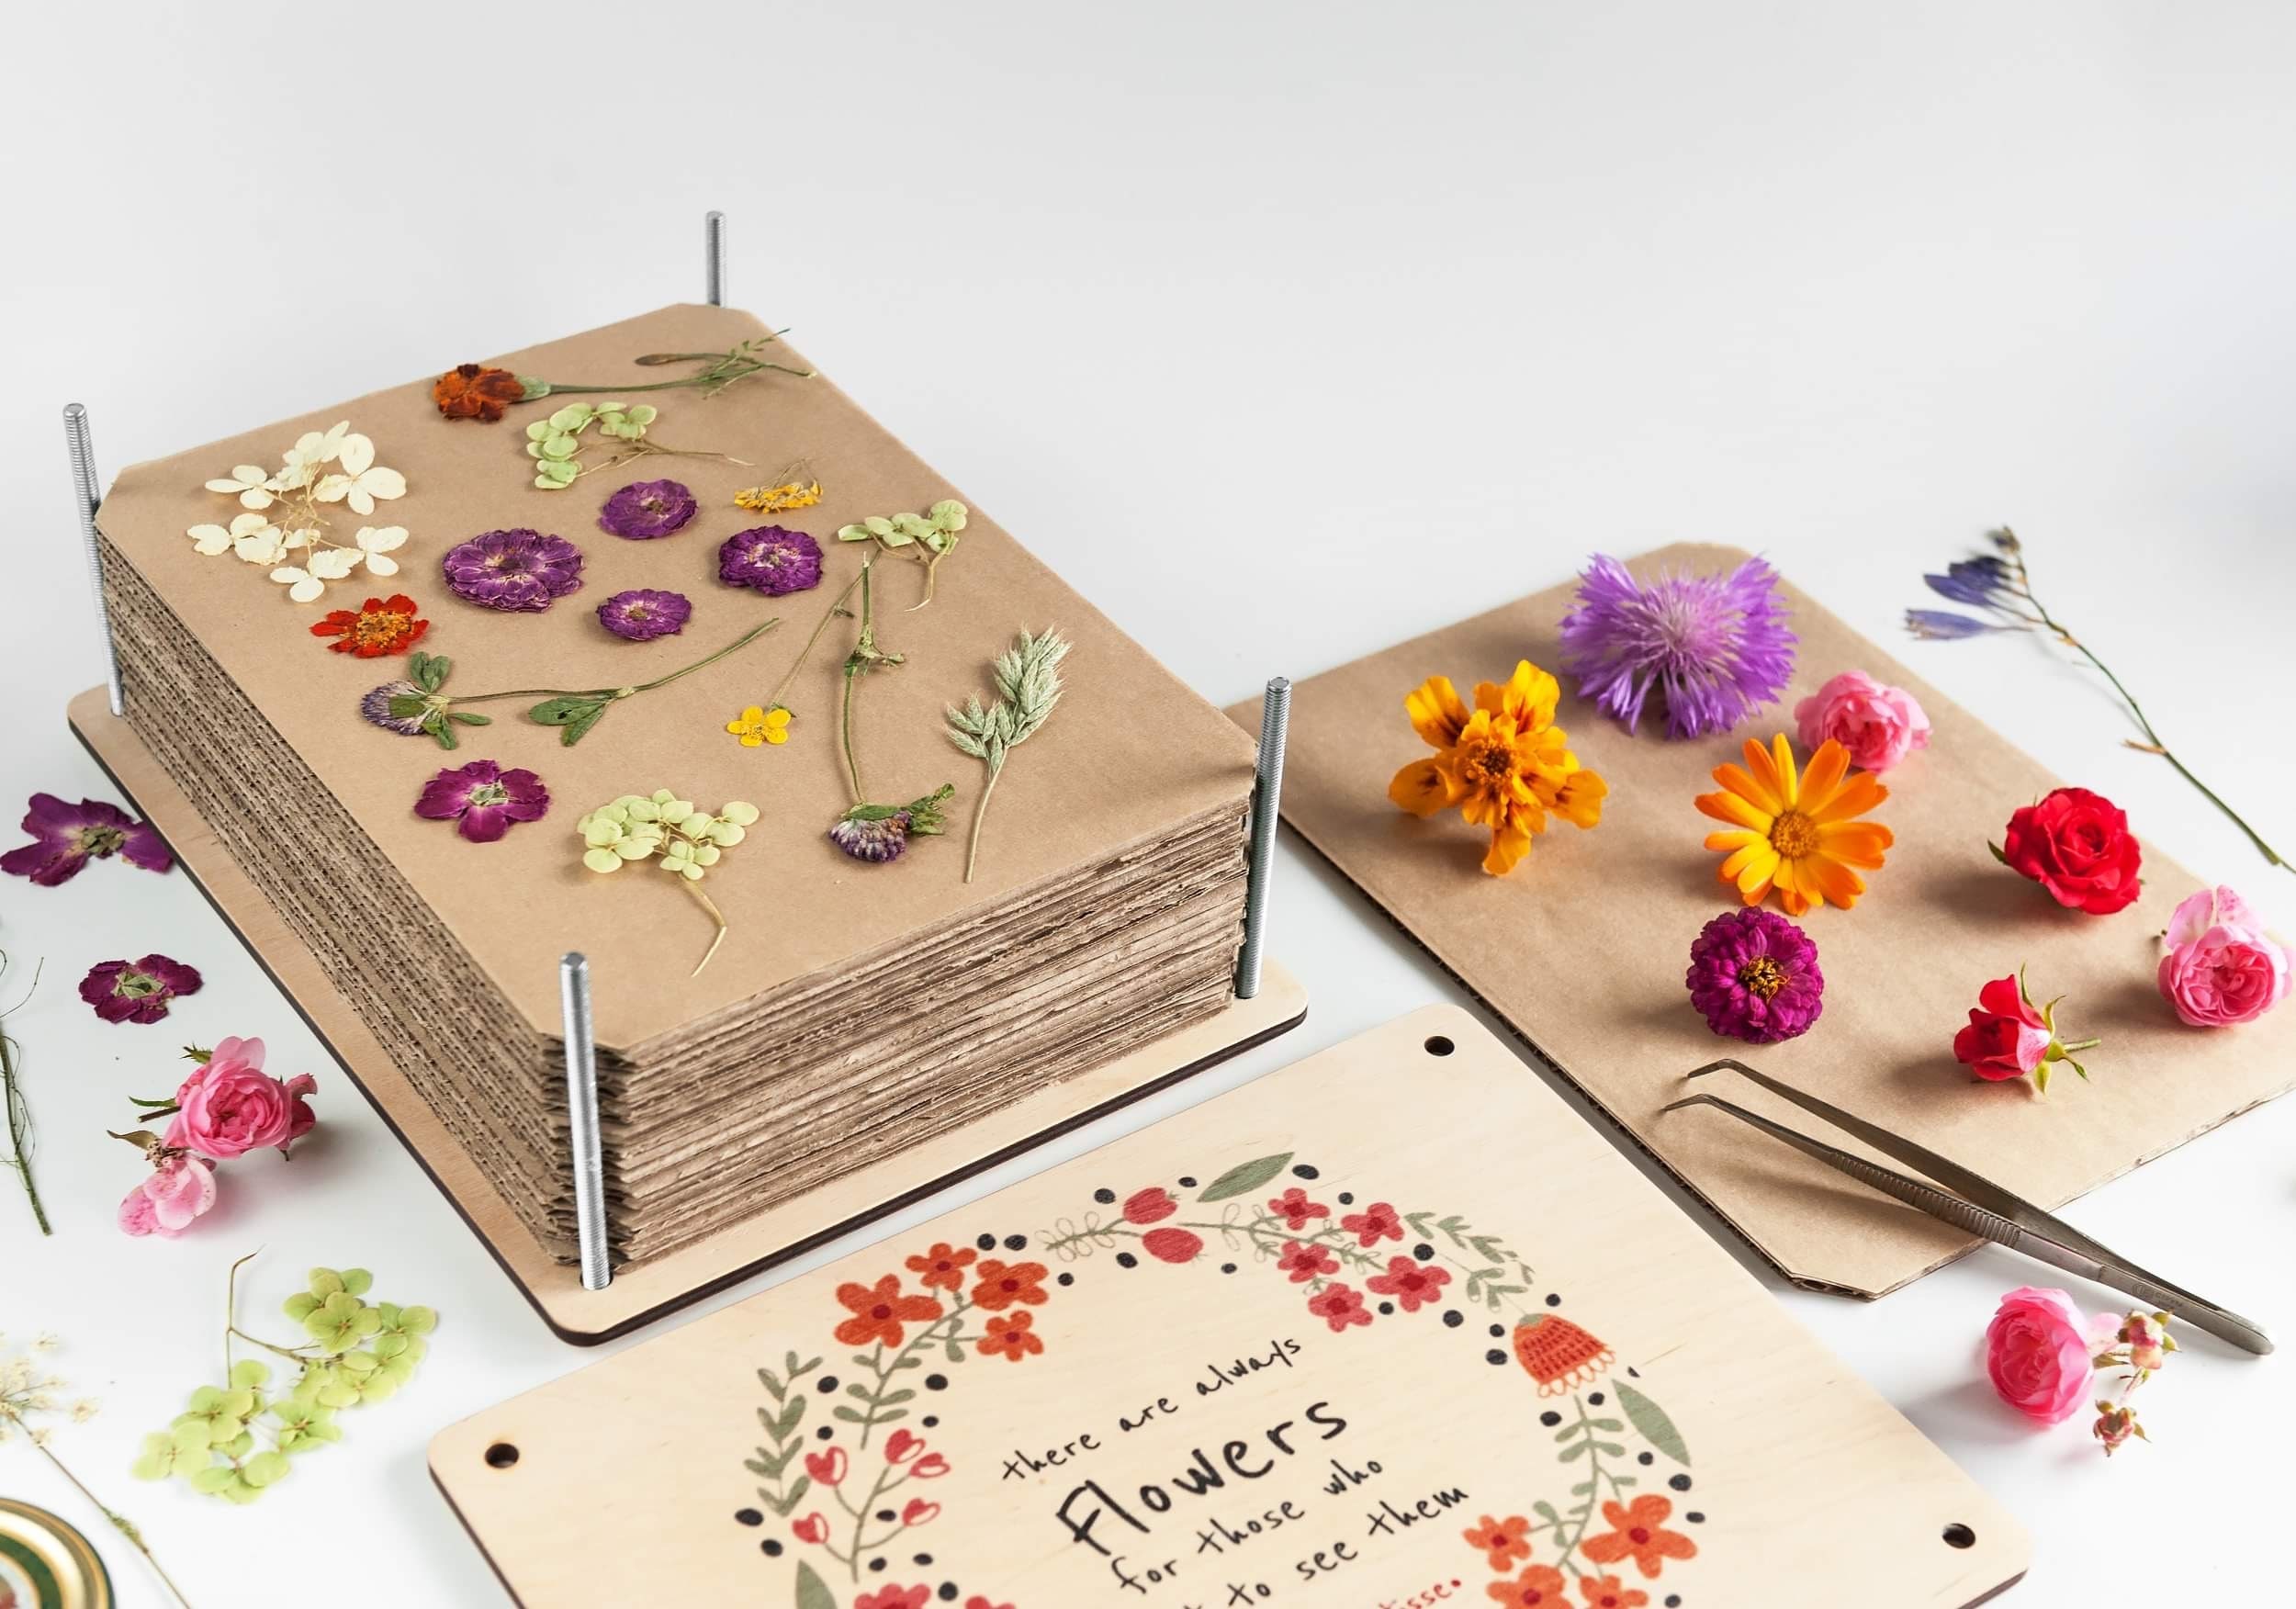 Flower Magic' Botanical Flower Press Kit by The Quirky Cup Collective